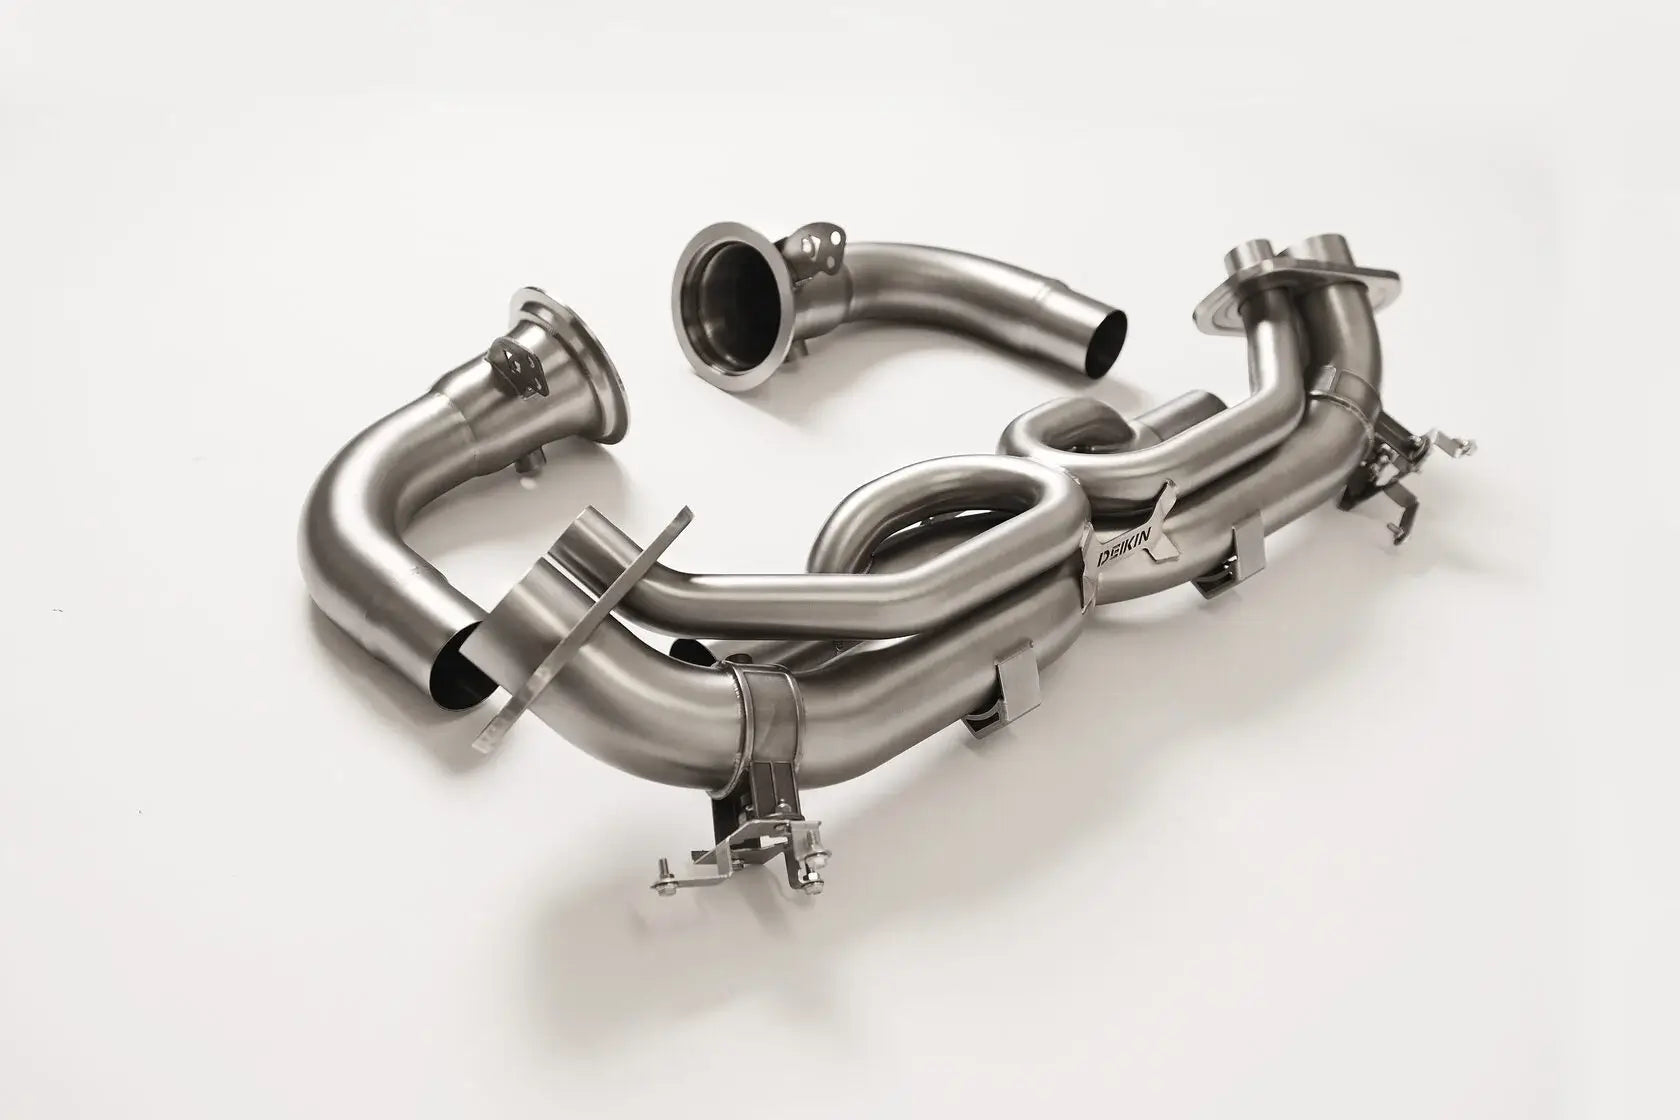 DEIKIN 10-PO.911.T/TS.992.R-ES-DP-Ti-00 Exhaust system "Race" Titan for Porsche 911 Turbo/Turbo S (992) complete with downpipes without HeatShield Photo-5 